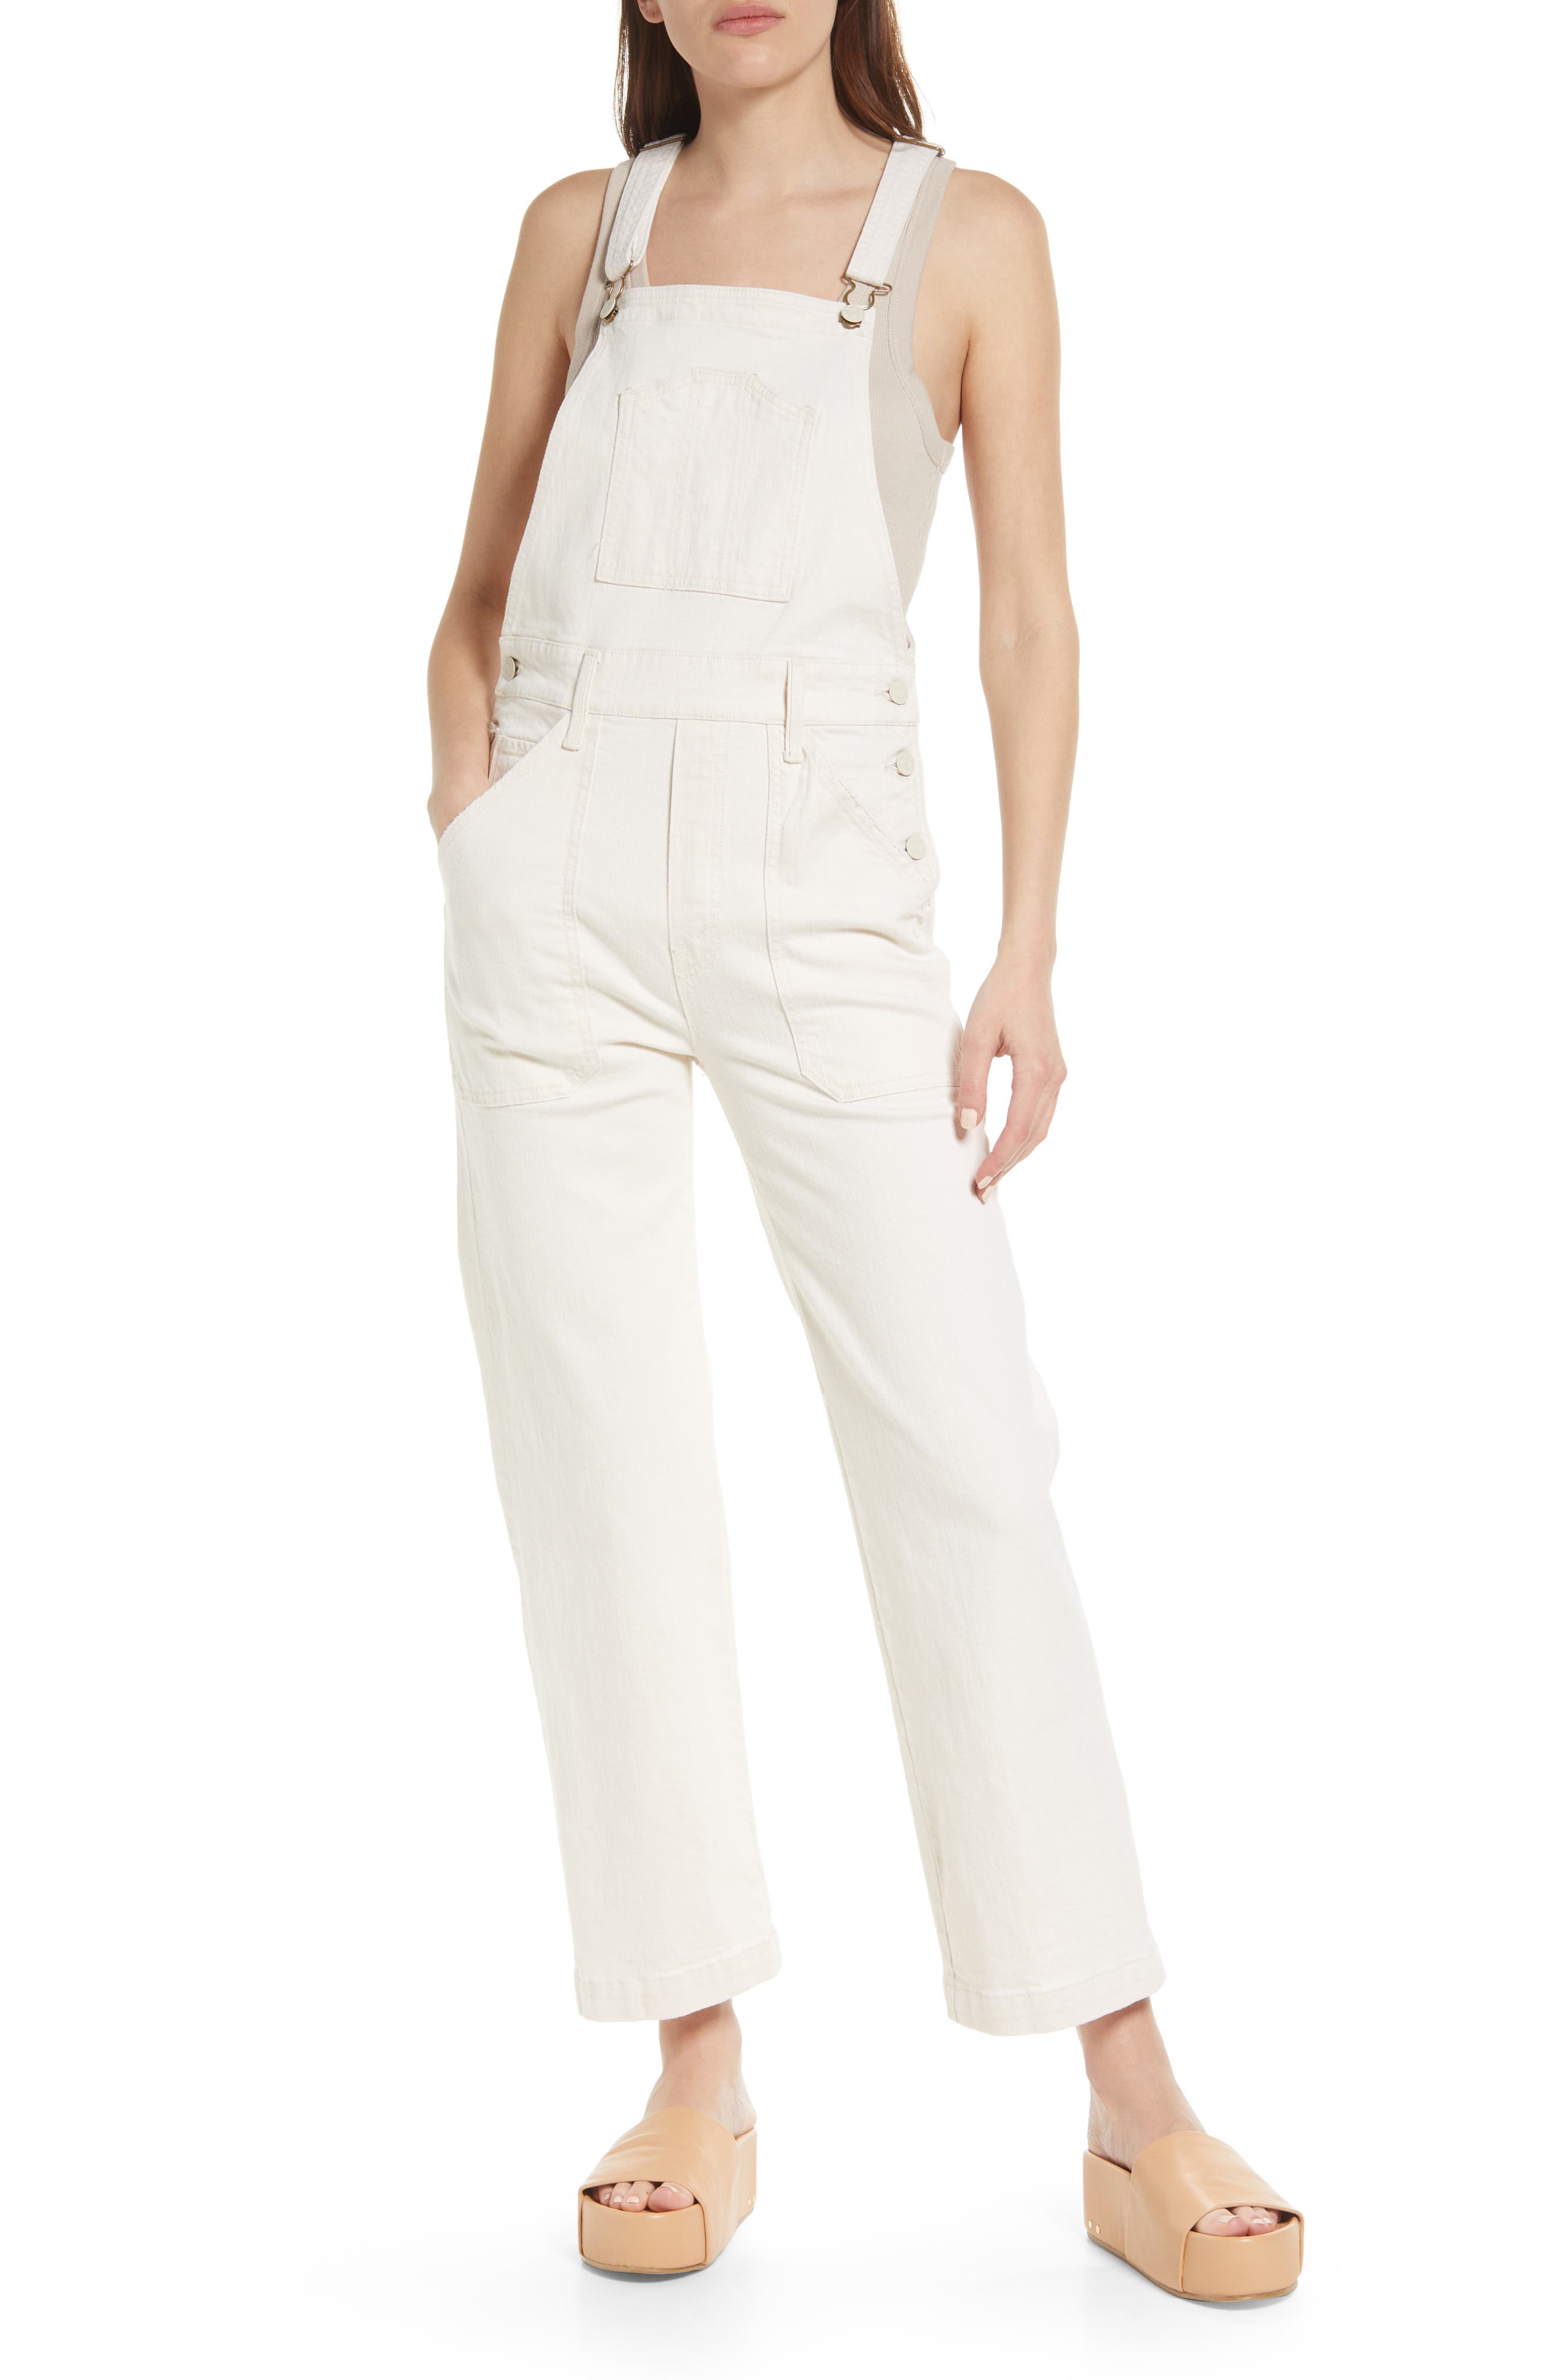 The Patch Pocket Denim Ankle Overalls MOTHER